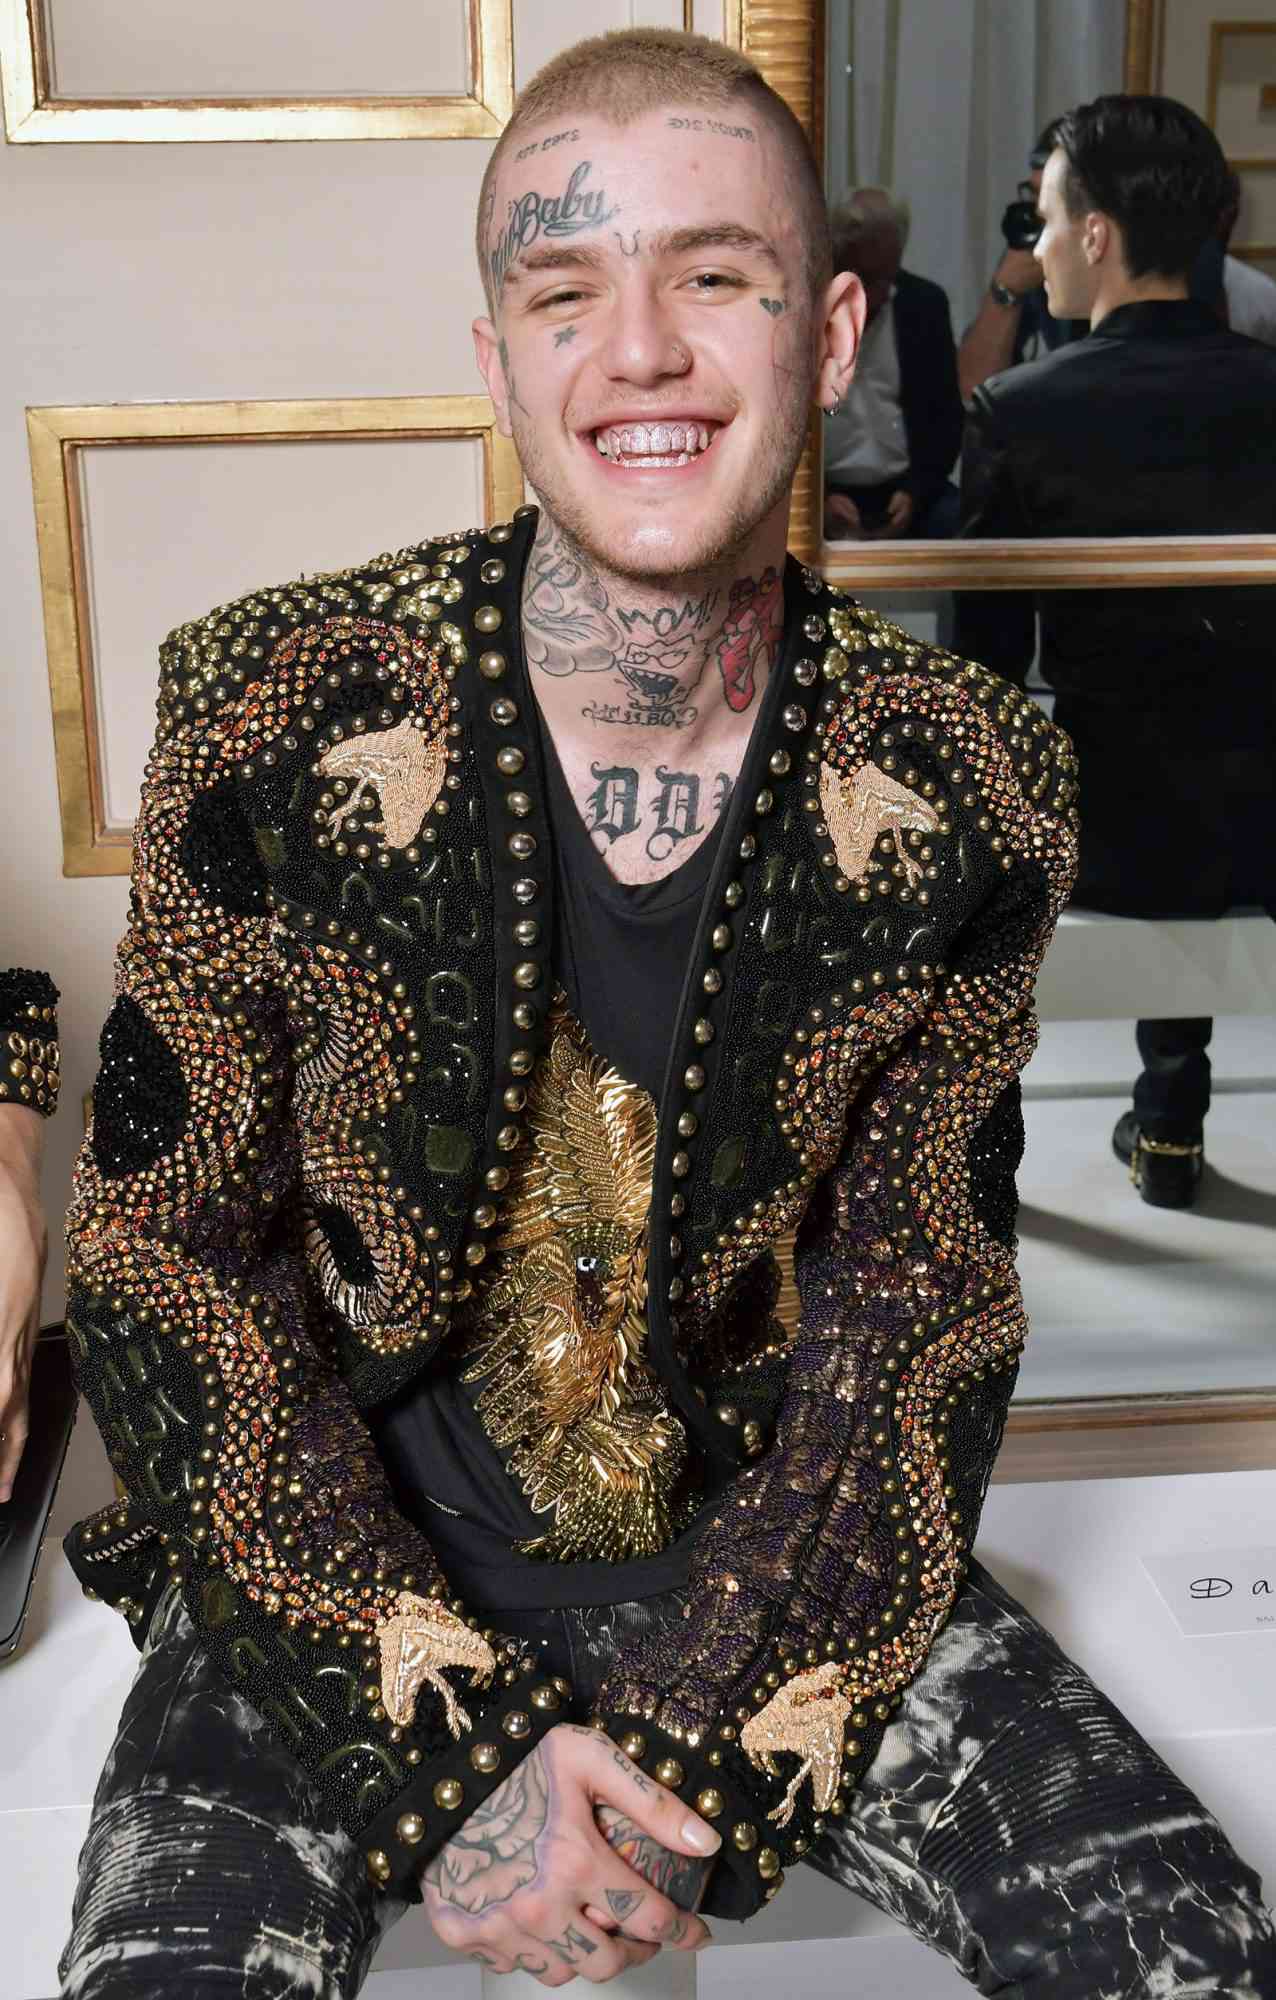 collin shanahan recommends lil peep smiling pic